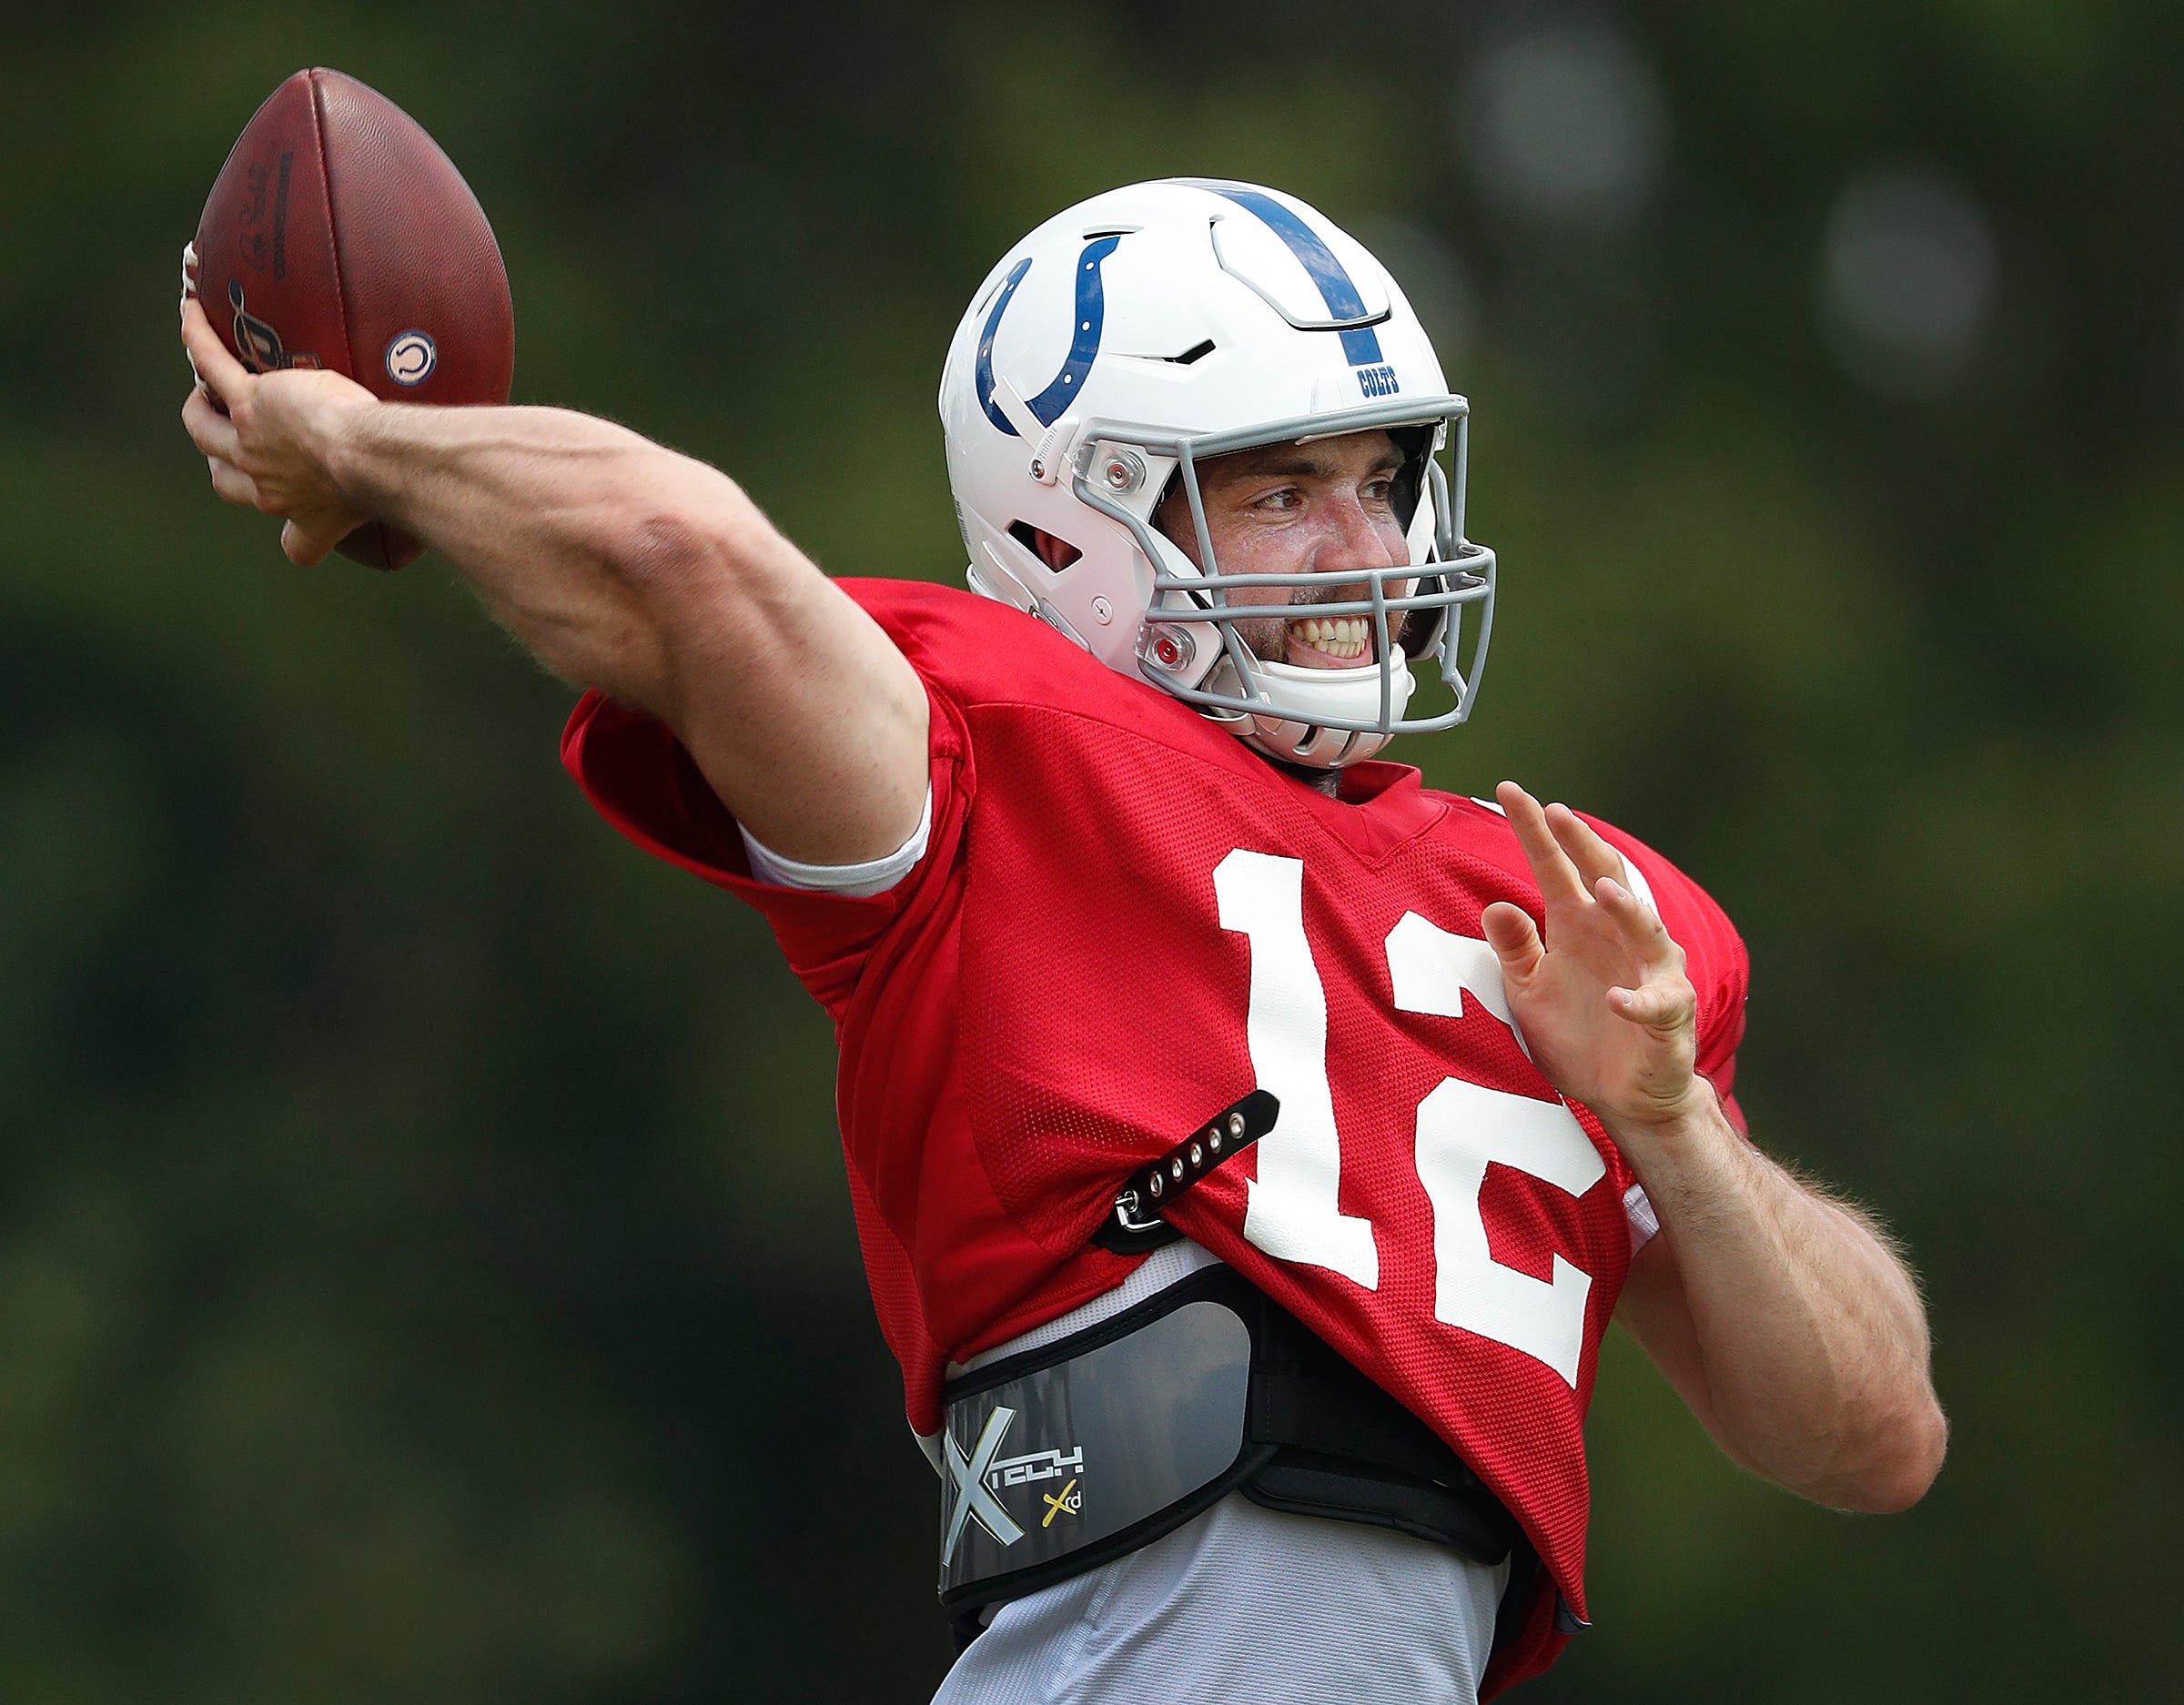 Colts QB Andrew Luck says shoulder injury saved his relationship with his wife